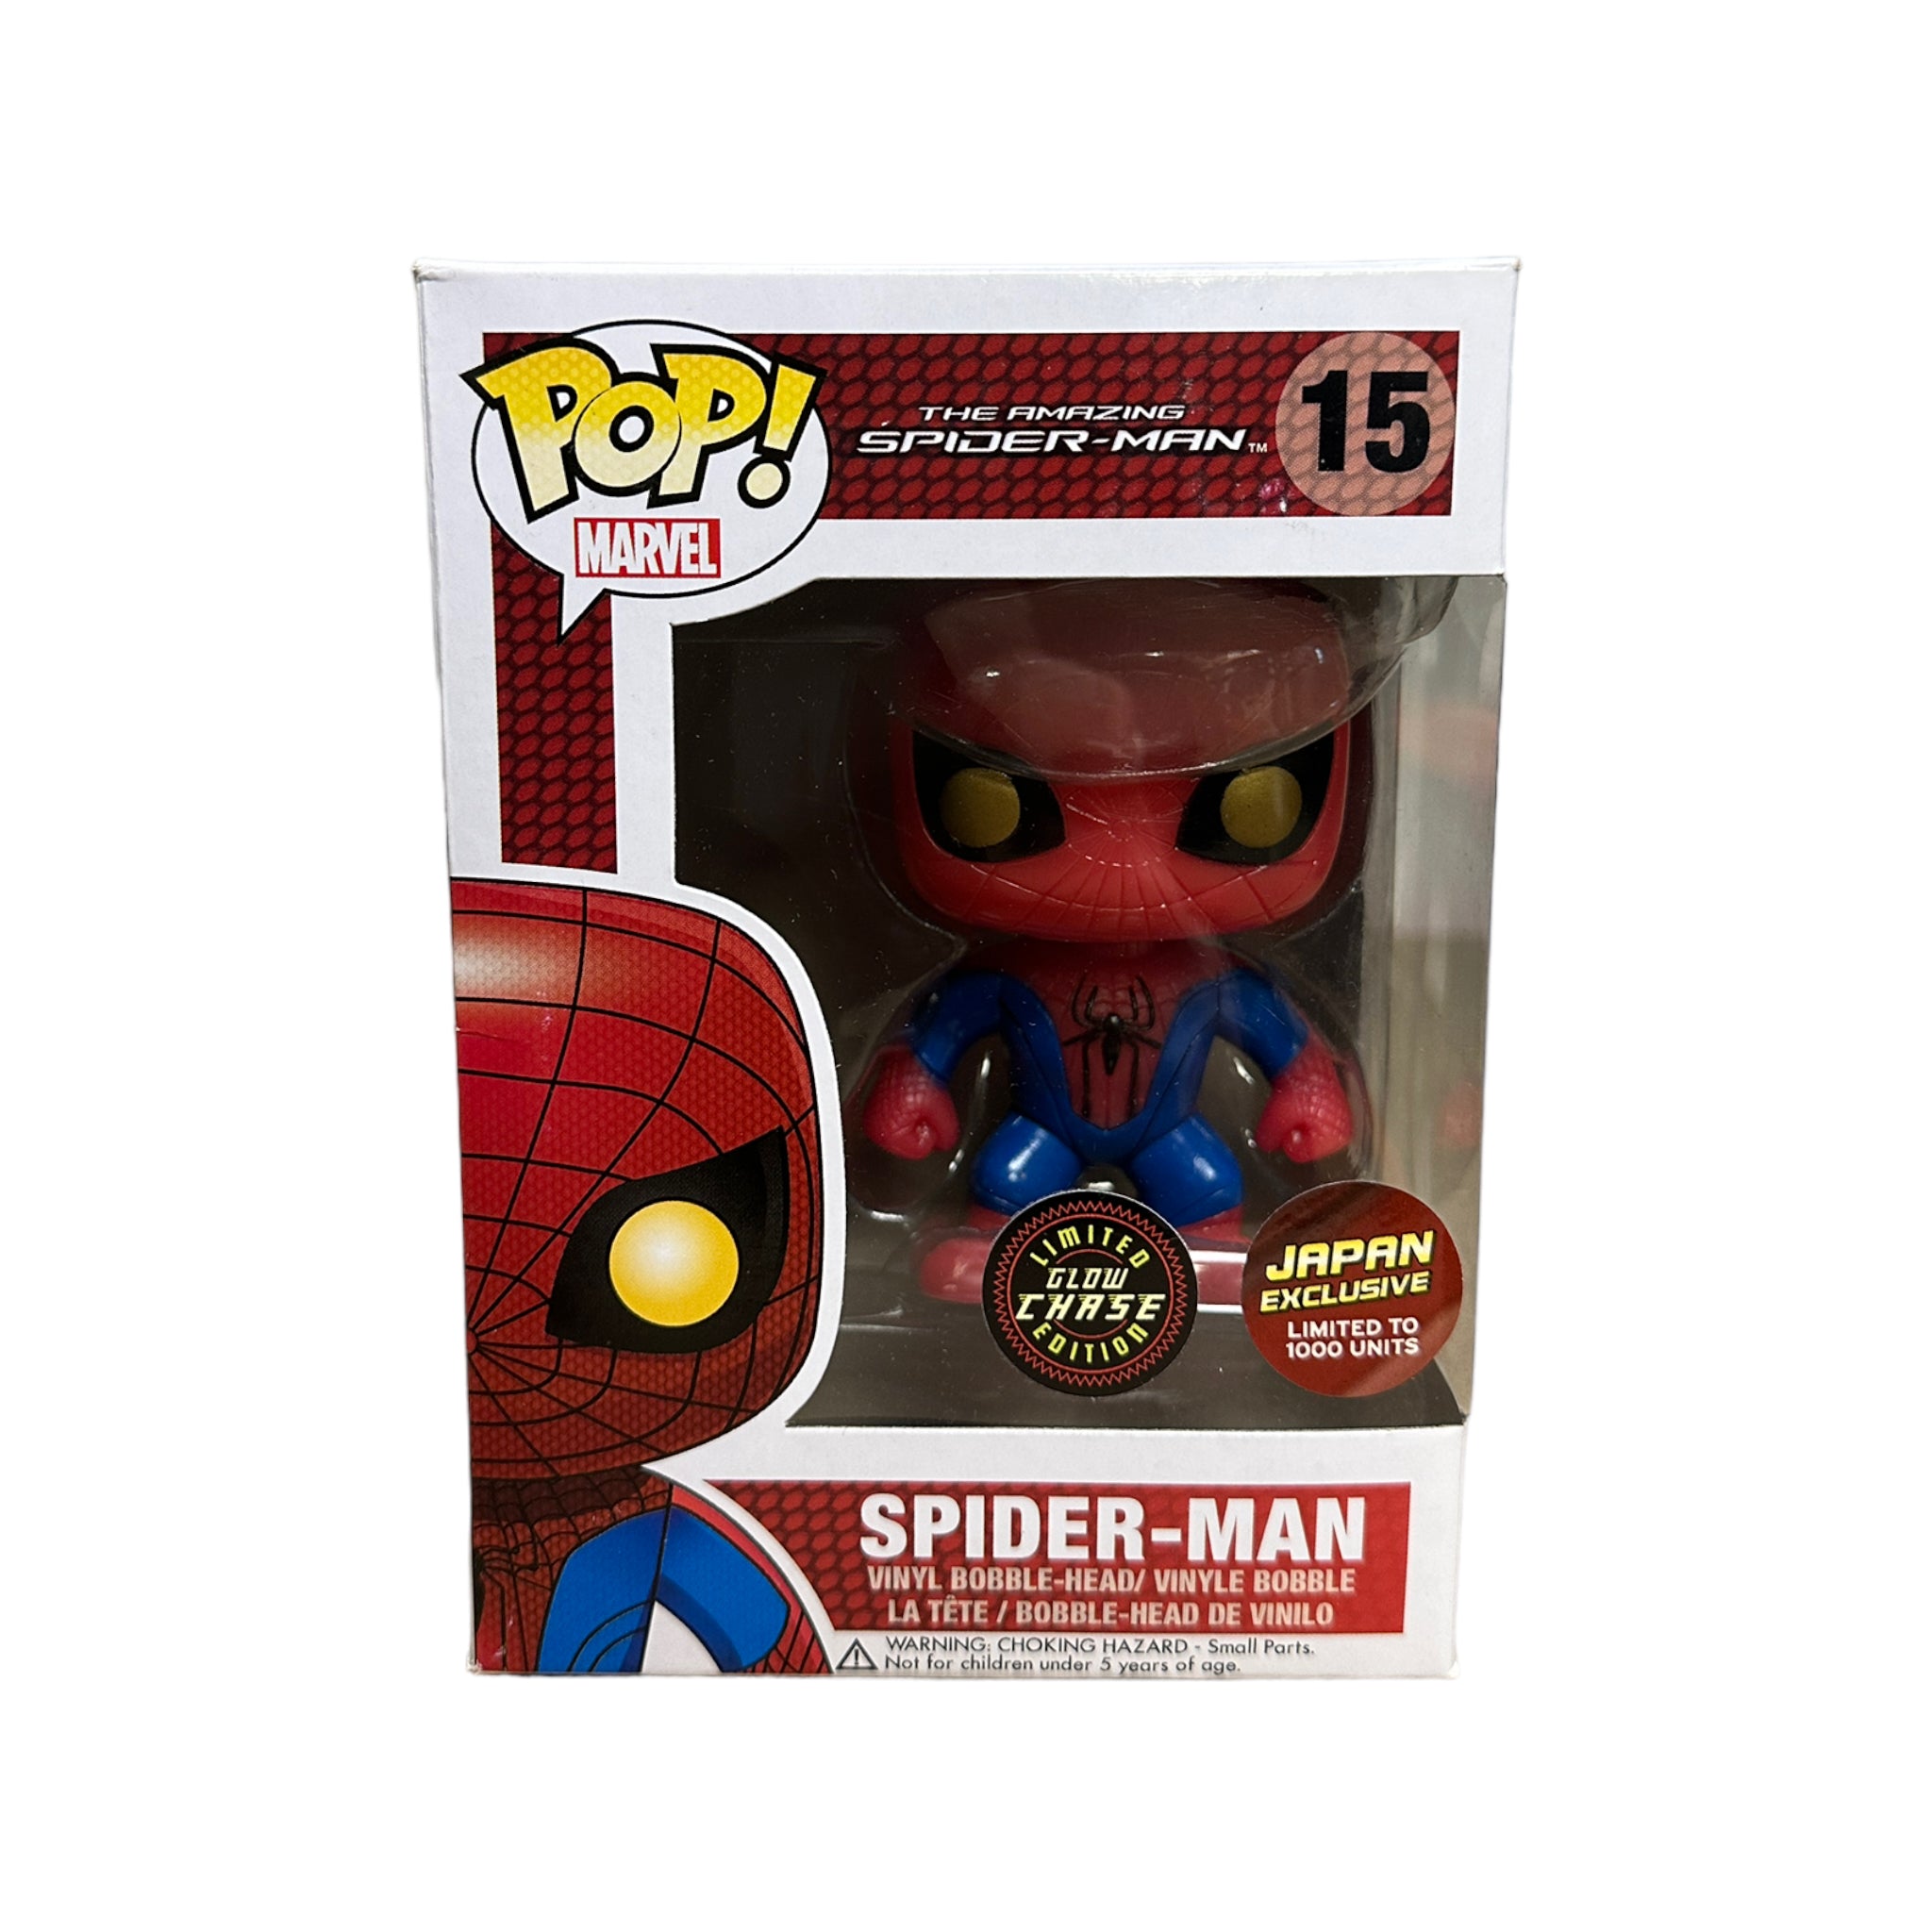 Spider-Man #15 (Glow Chase) Funko Pop! - The Amazing Spider-Man - Japan Premiere Exclusive LE1000 Pcs - Condition 7.5/10